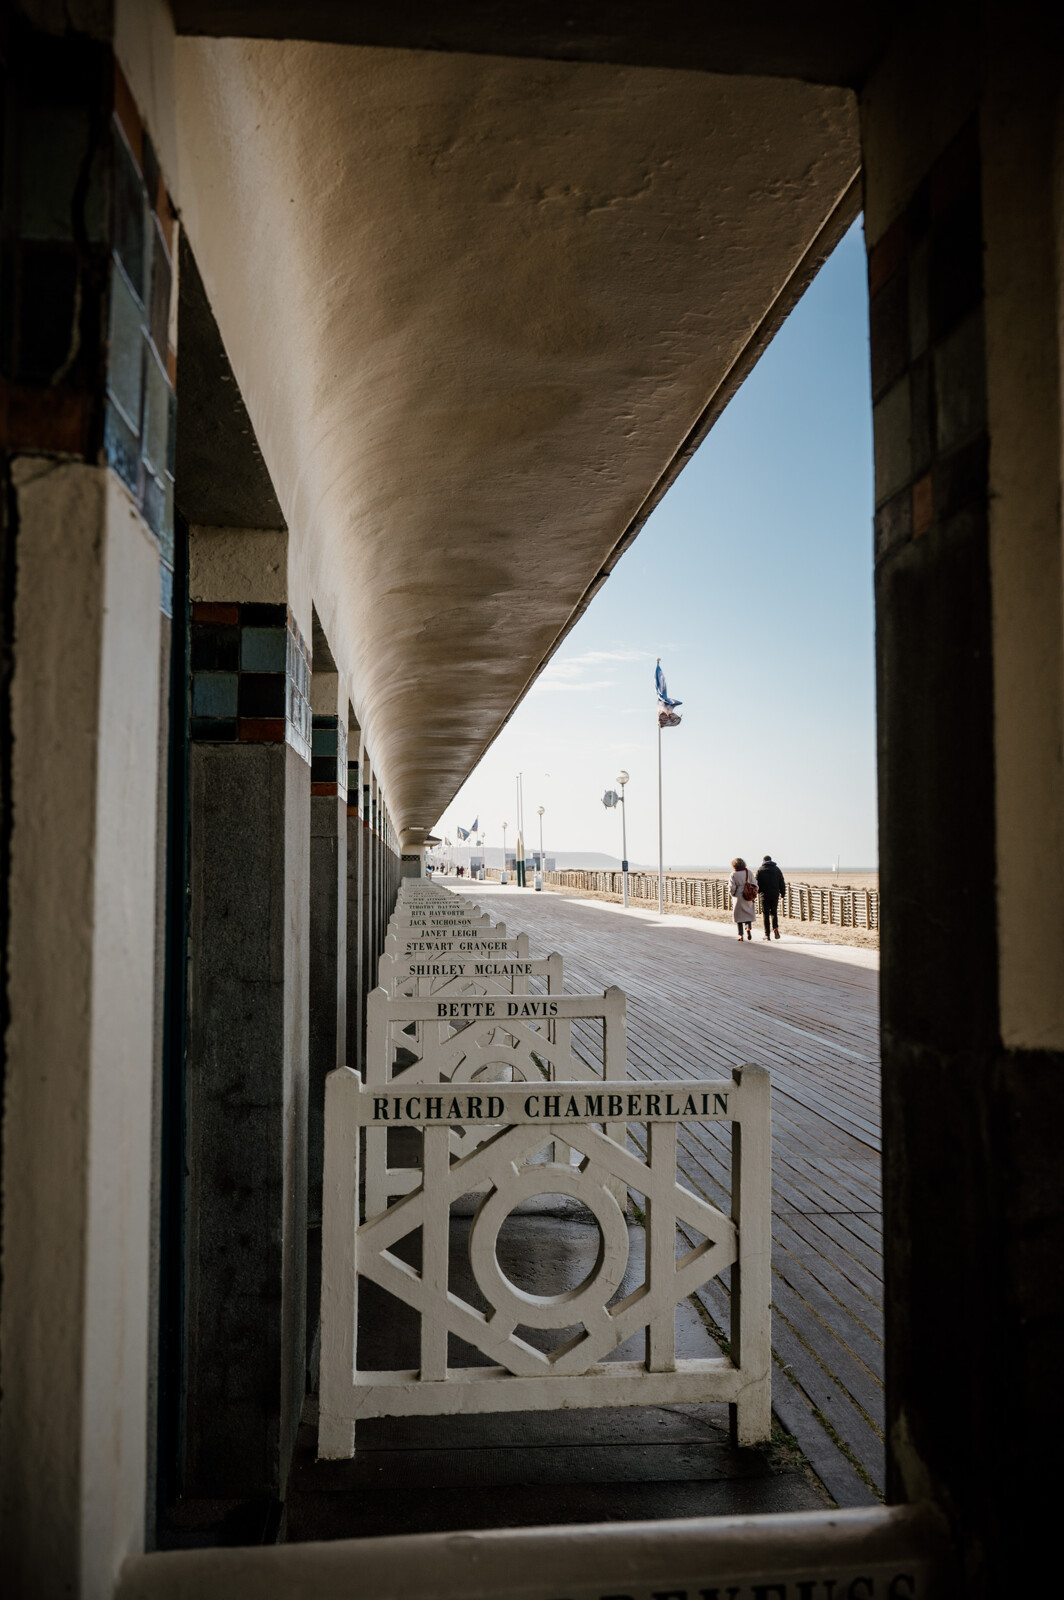 Planches Deauville